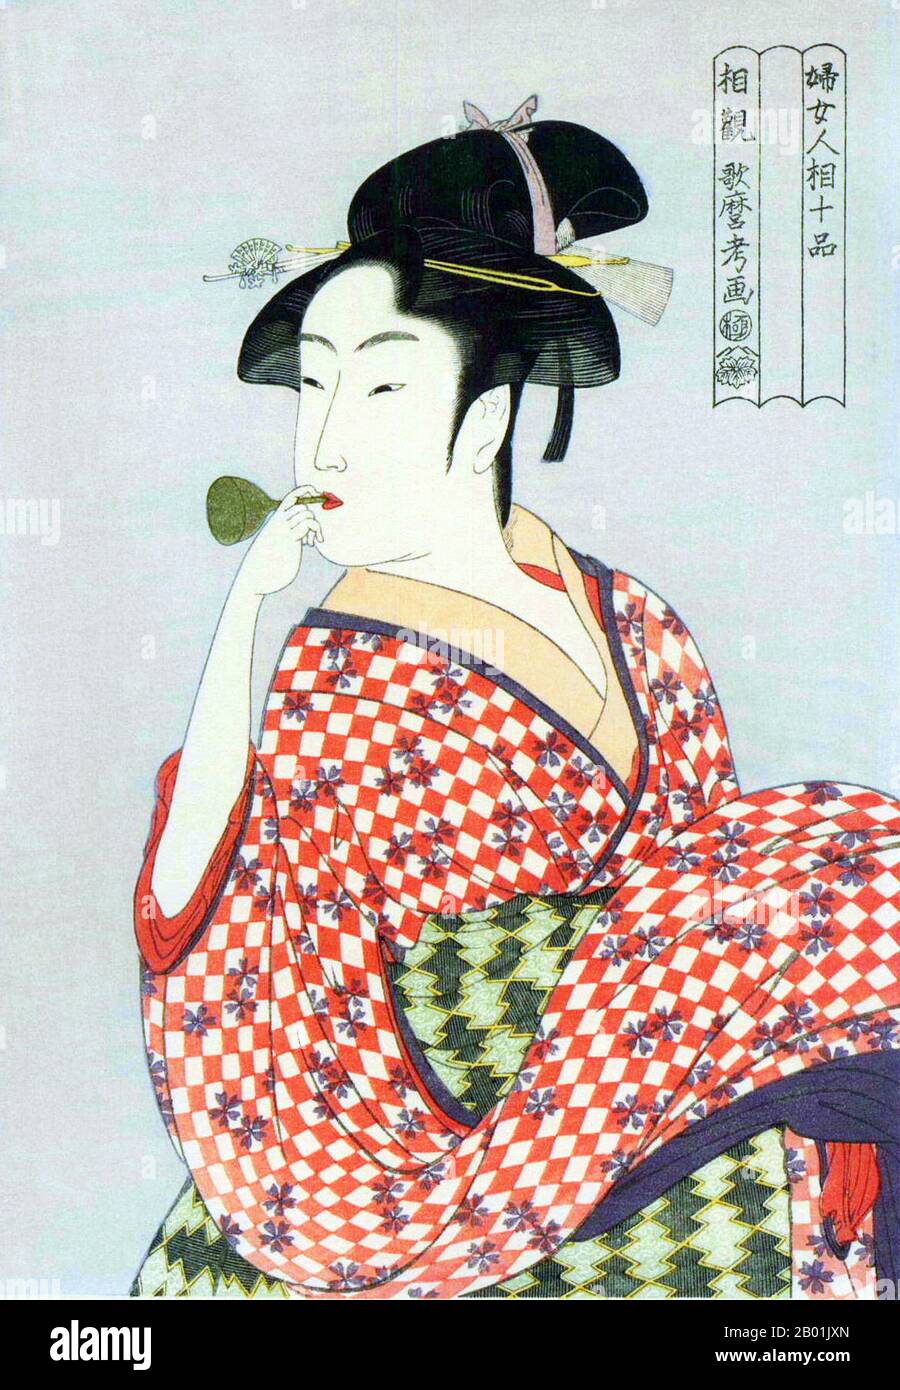 Japan: 'Young Woman Blowing a Glass Pipe'. Ukiyo-e woodblock print by Kitagawa Utamaro (c. 1753 - 31 October 1806), c. 1792-1793.  Kitagawa Utamaro was a Japanese printmaker and painter, who is considered one of the greatest artists of woodblock prints (ukiyo-e). He is known especially for his masterfully composed studies of women, known as bijinga. He also produced nature studies, particularly illustrated books of insects. Stock Photo